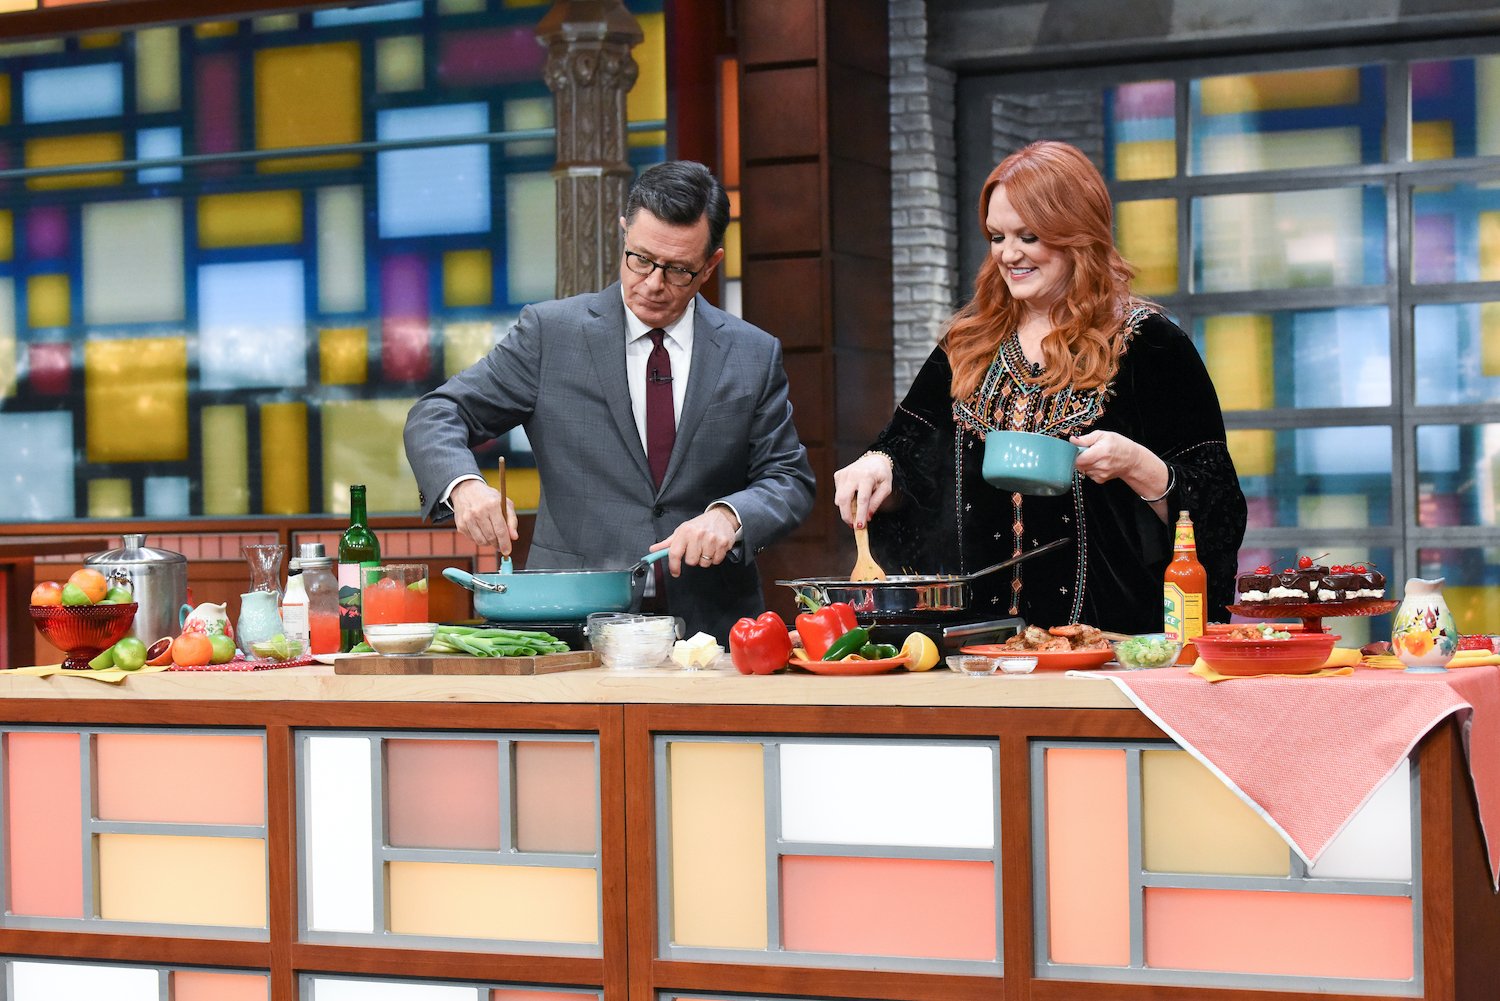 Ree Drummond cooks with Stephen Colbert during a 2019 appearance on The Late Show with Stephen Colbert